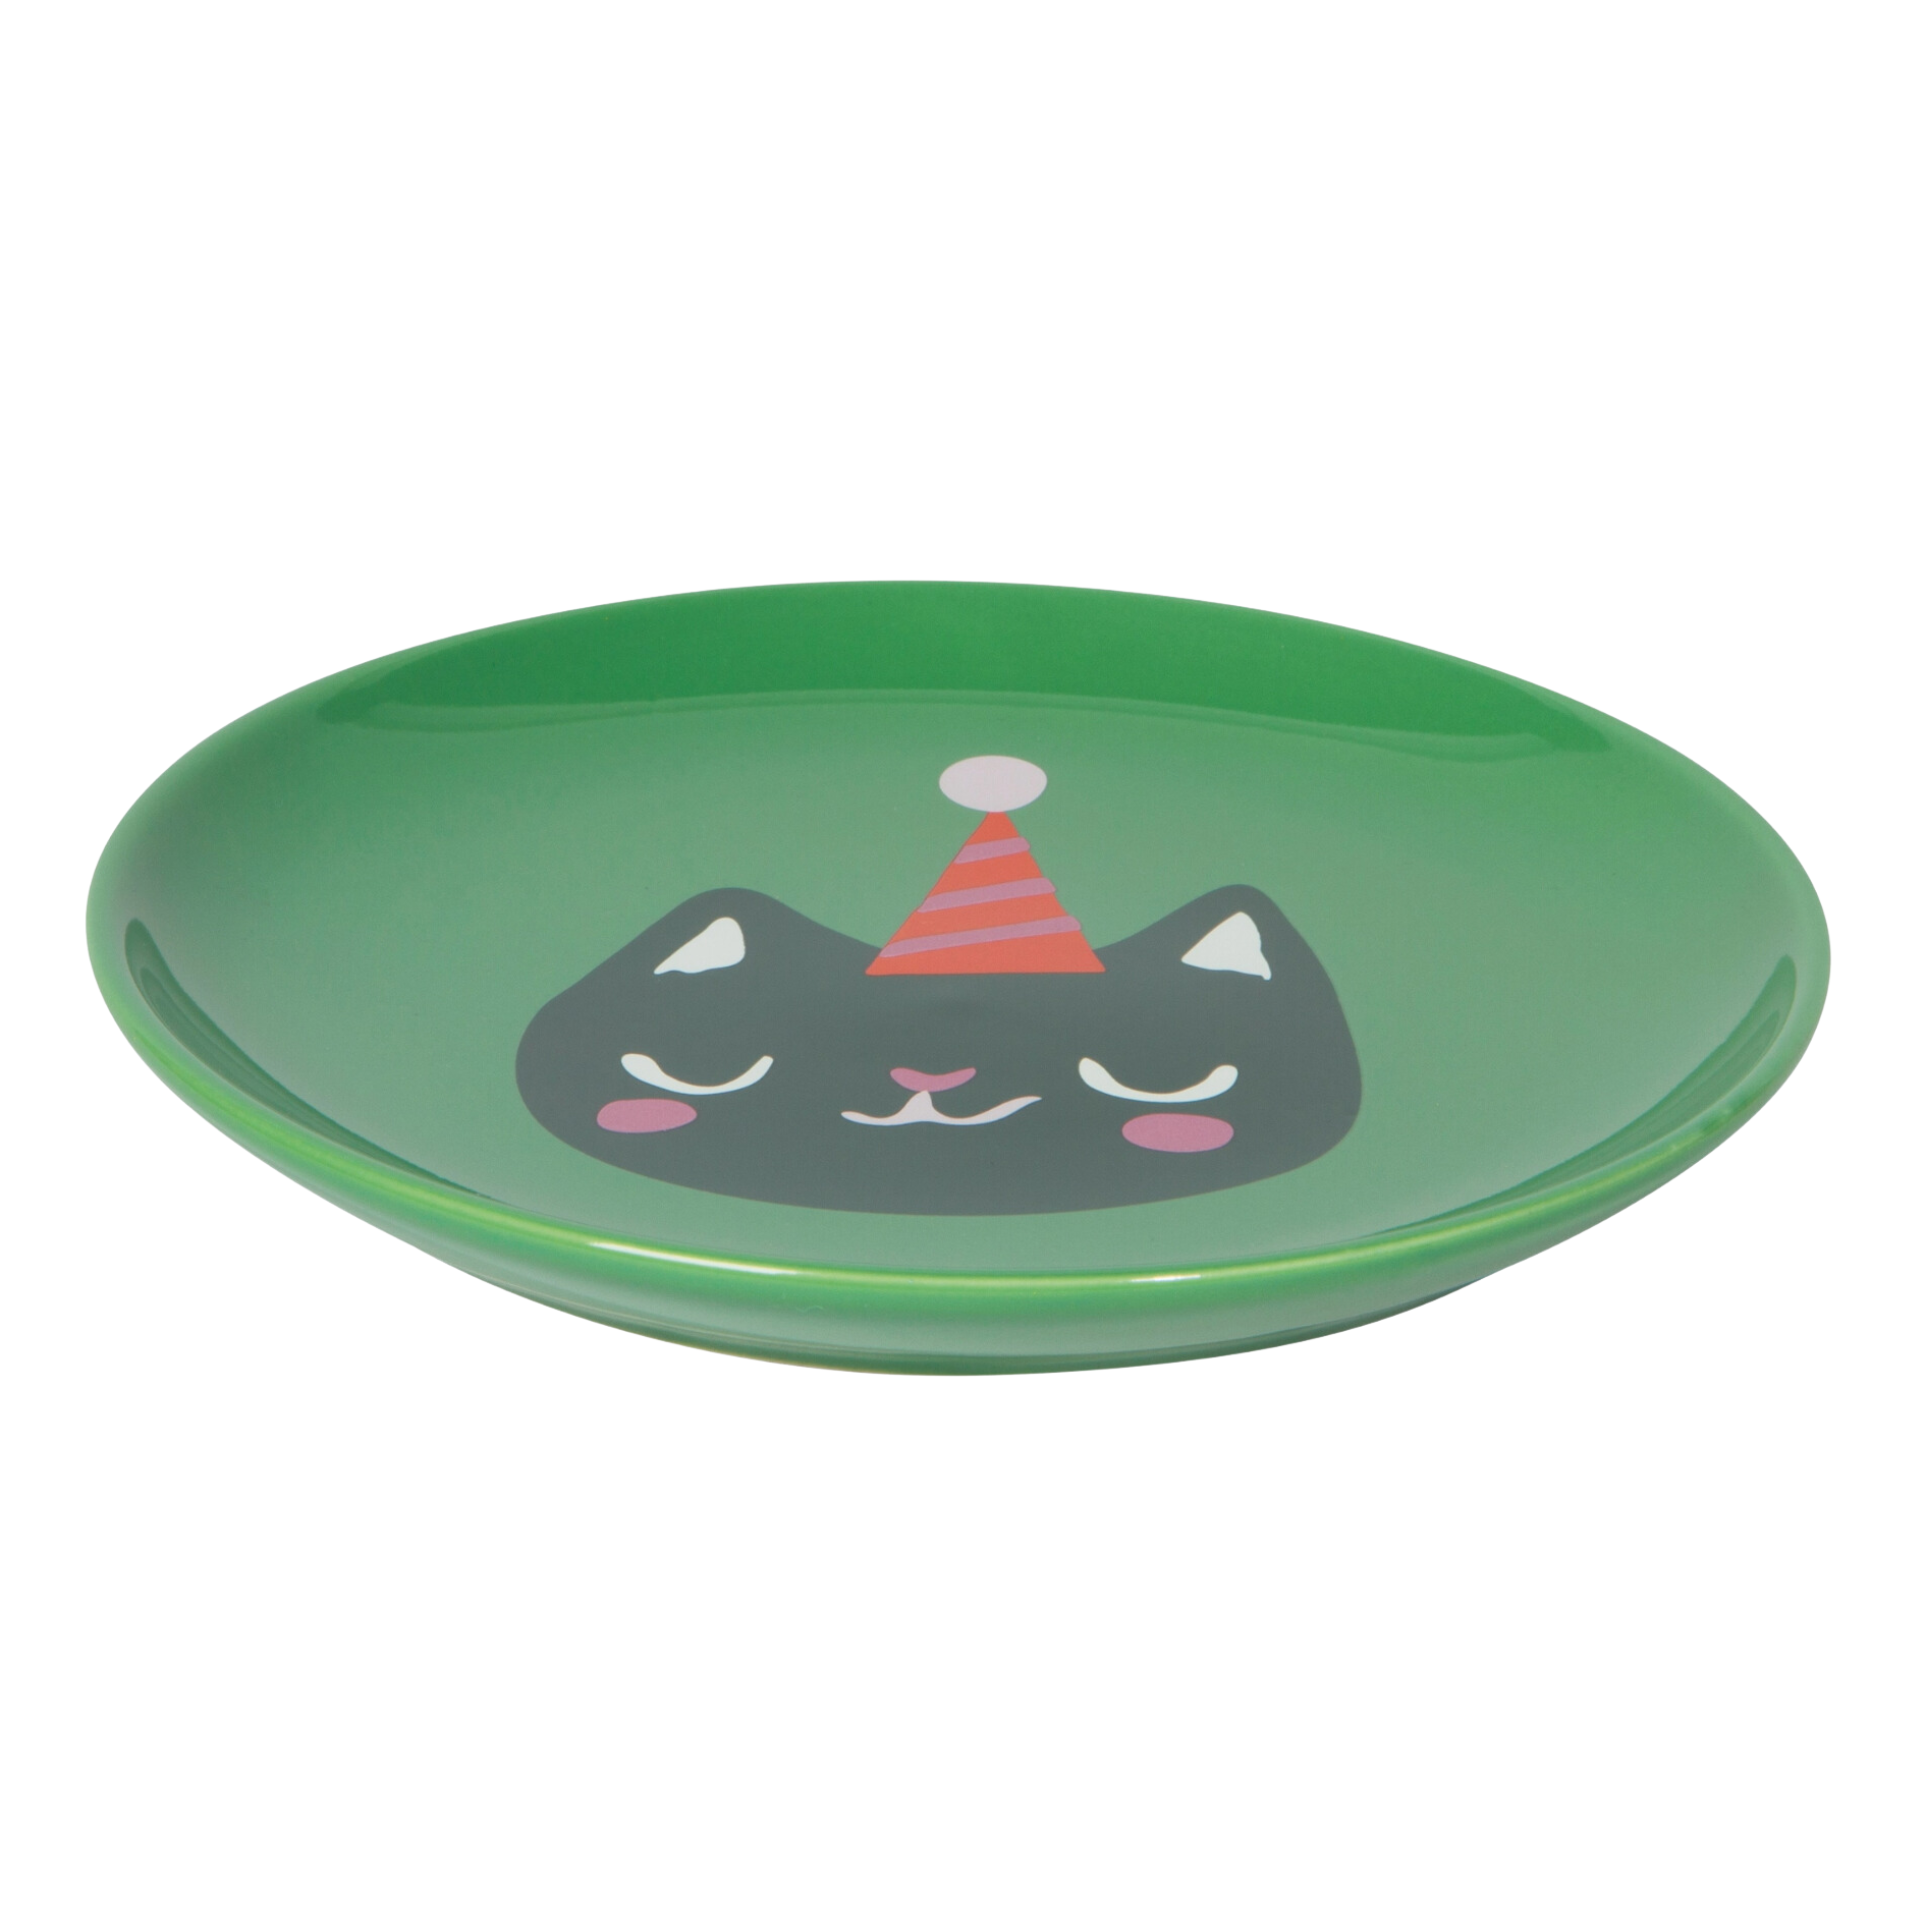 Let It Meow Christmas Appetizer Plate featuring a playful cat wearing a cozy party hat.